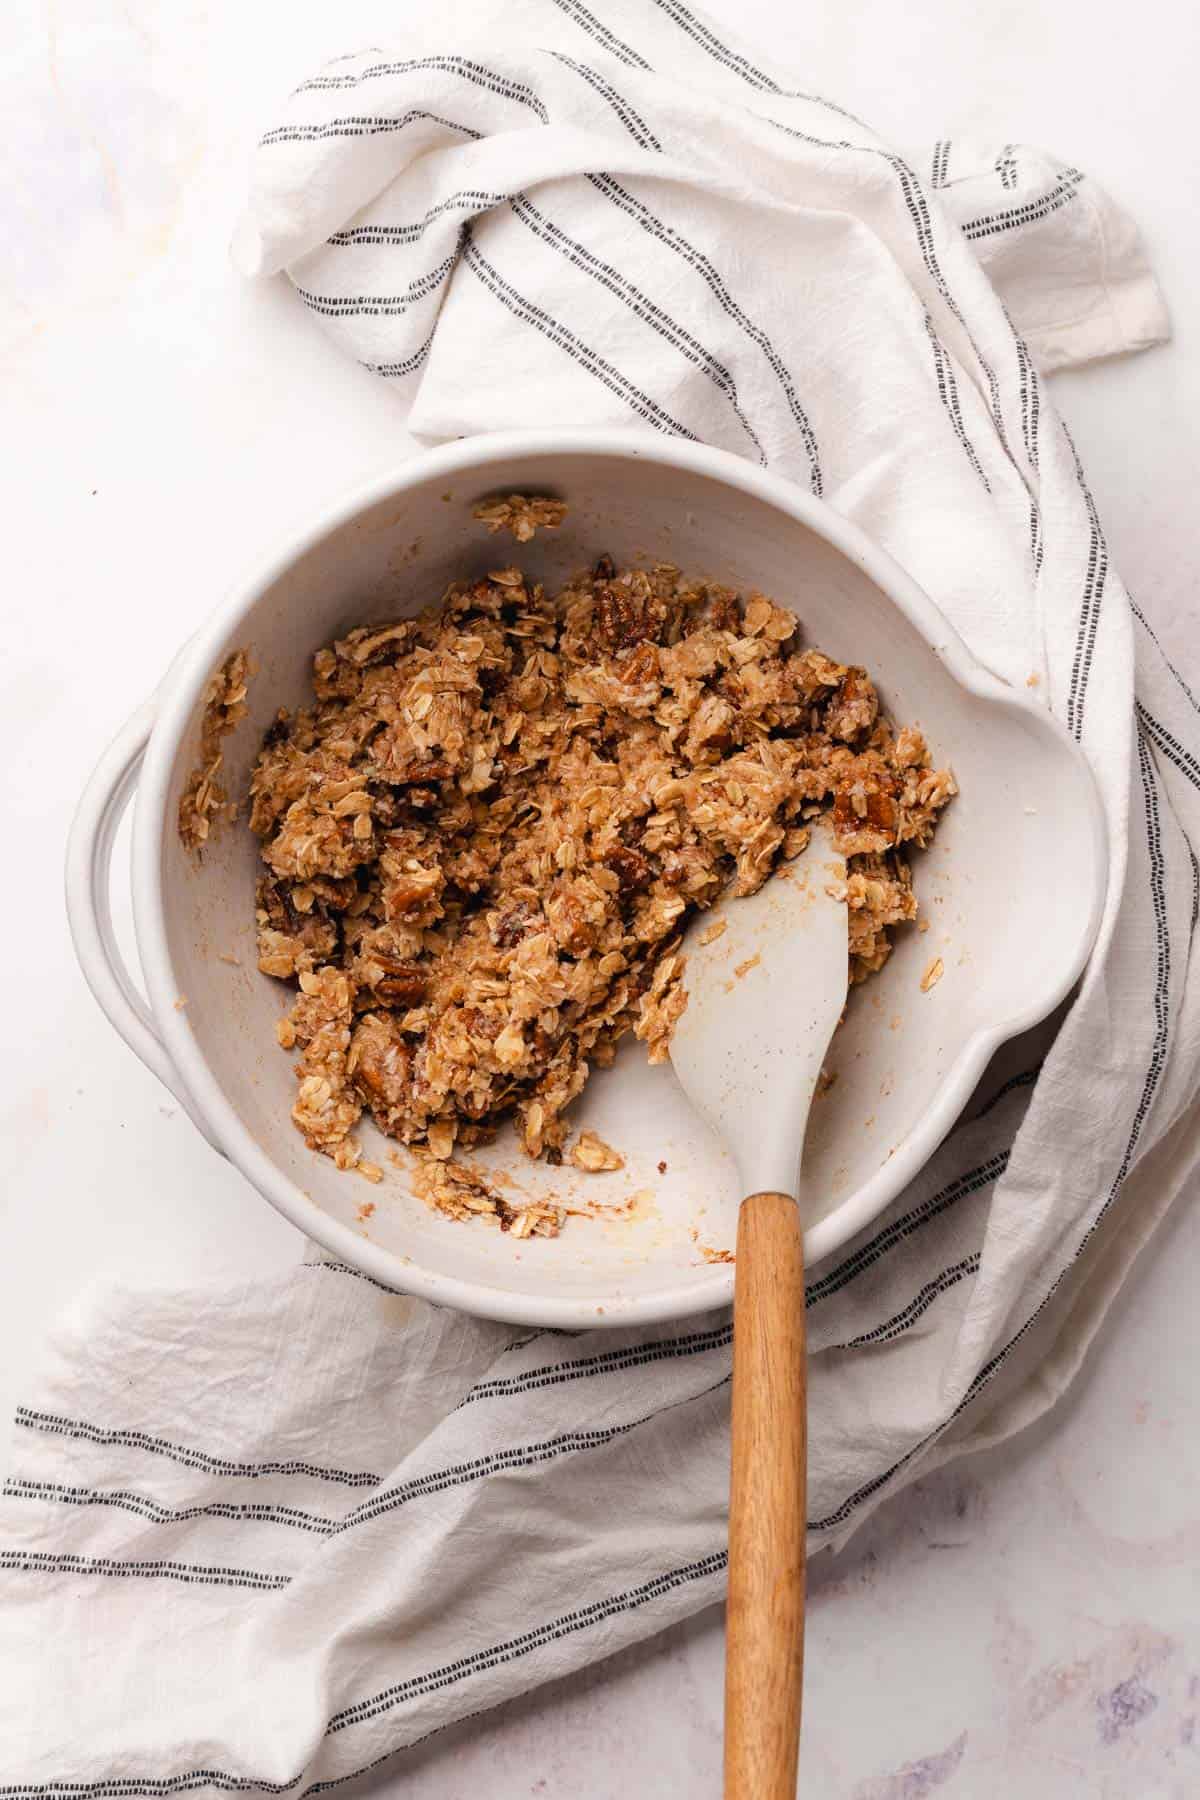 spatula mixing together dry crumble topping ingredients  in a ceramic bowl